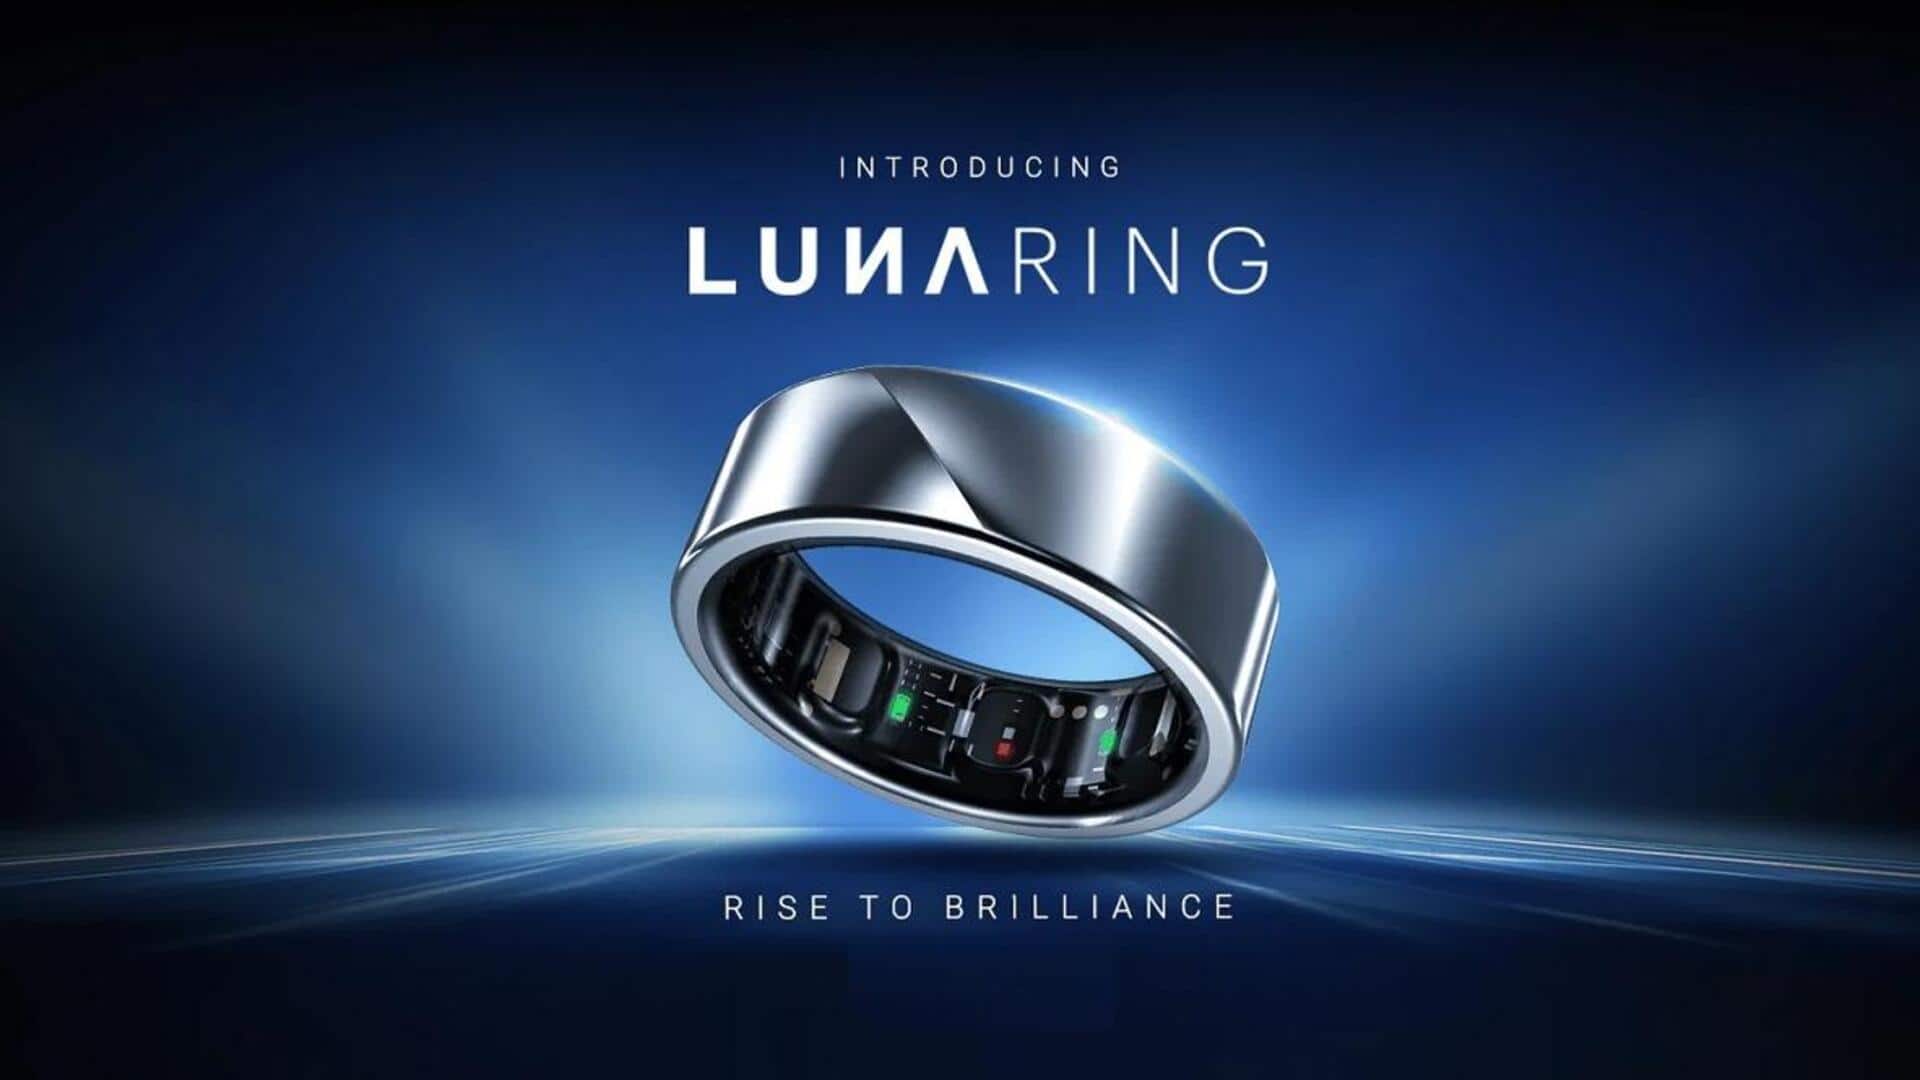 Noise Luna Ring now available in India at Rs. 15,000